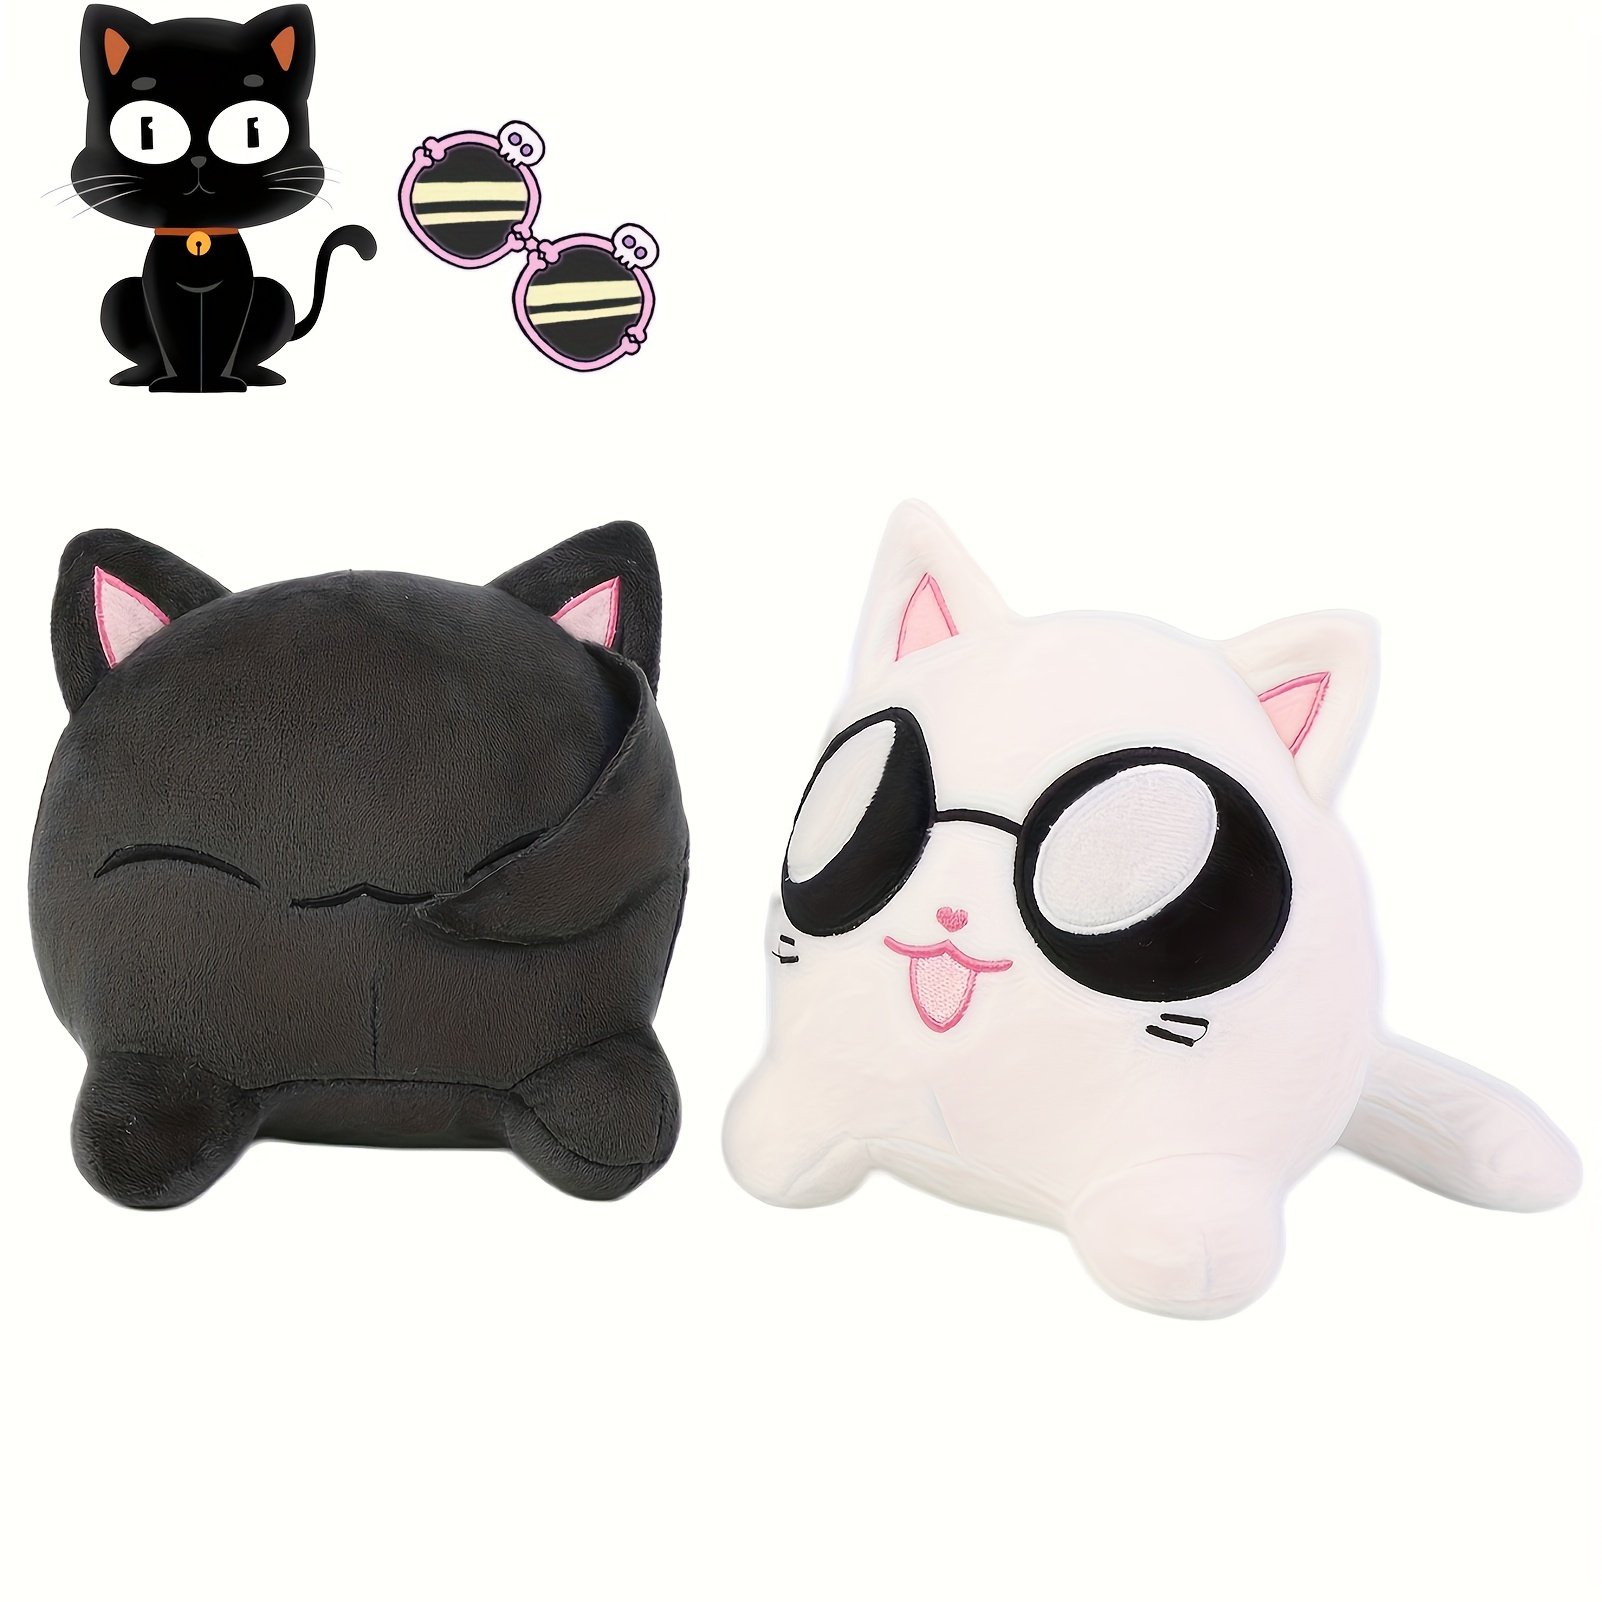 

Kawaii Anime Character Cat Plush Toy - Cute Sleeping Cat Game Doll, Soft Cotton, Perfect For Home Decor & Birthday Gifts, Ideal For Ages 0-3 Years - White & Gray Cat Plush Pillow